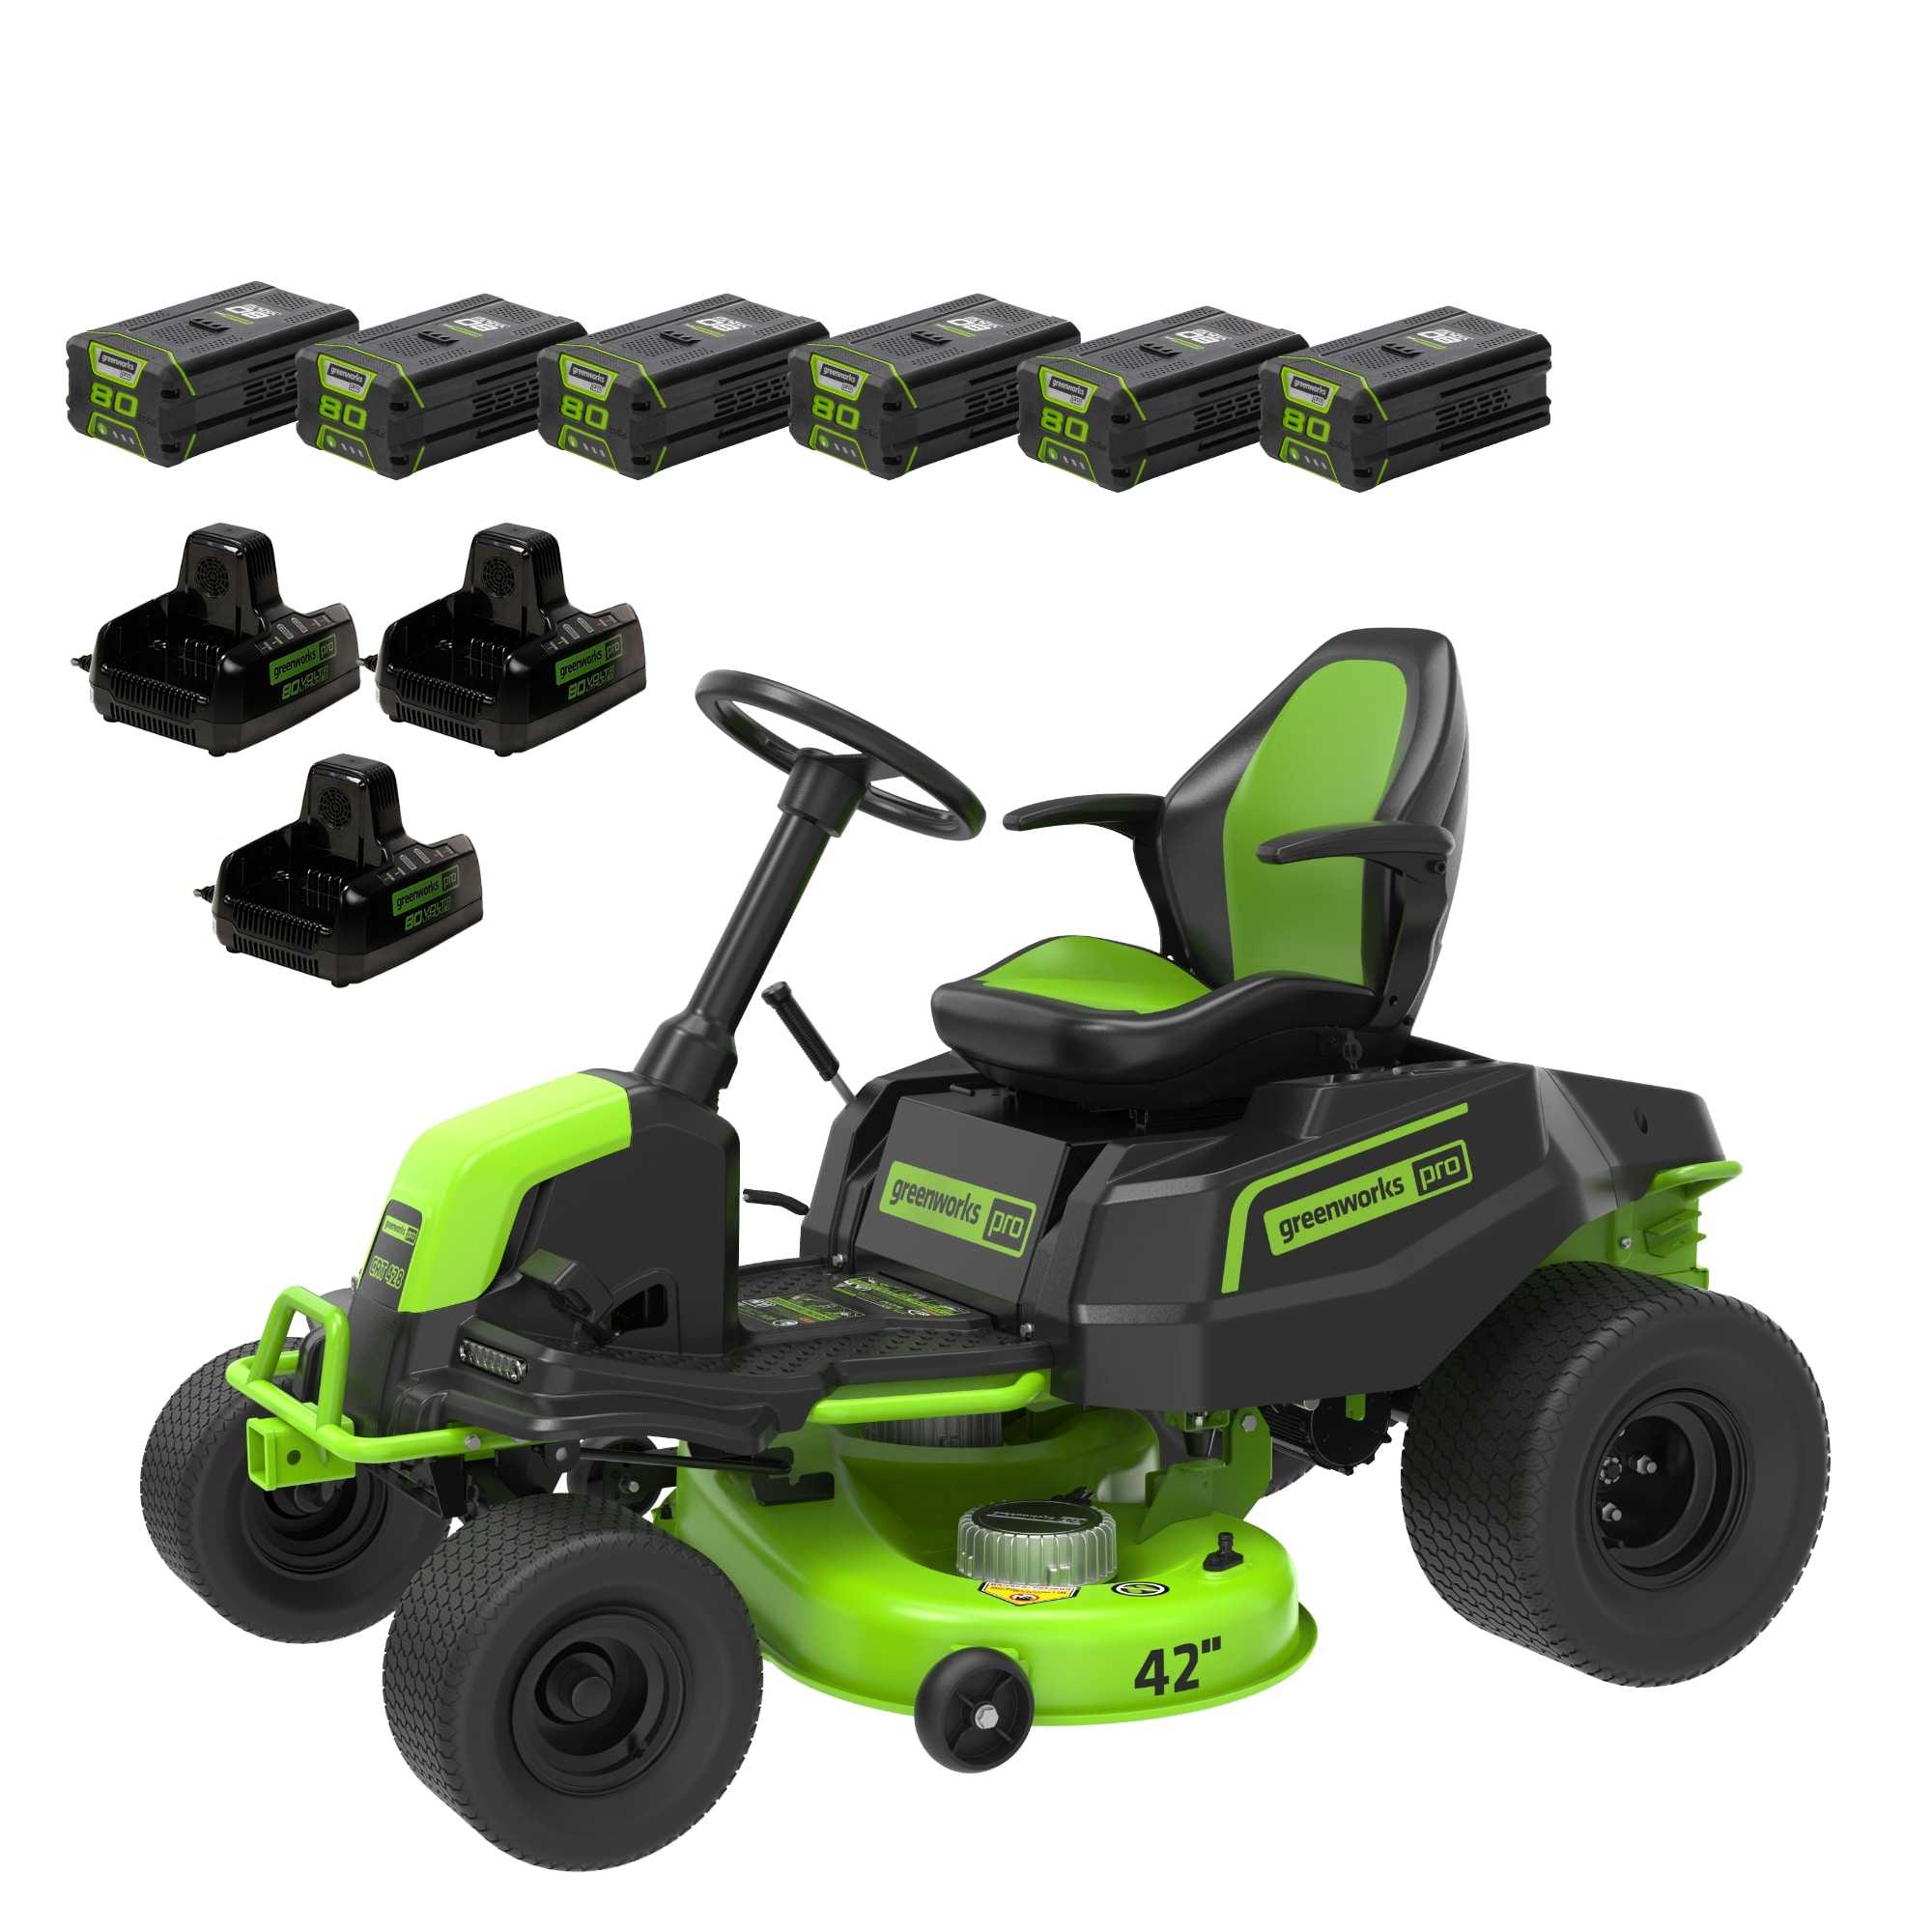 Greenworks Pro Crossover Tractor 42-inch Electric Riding Mower